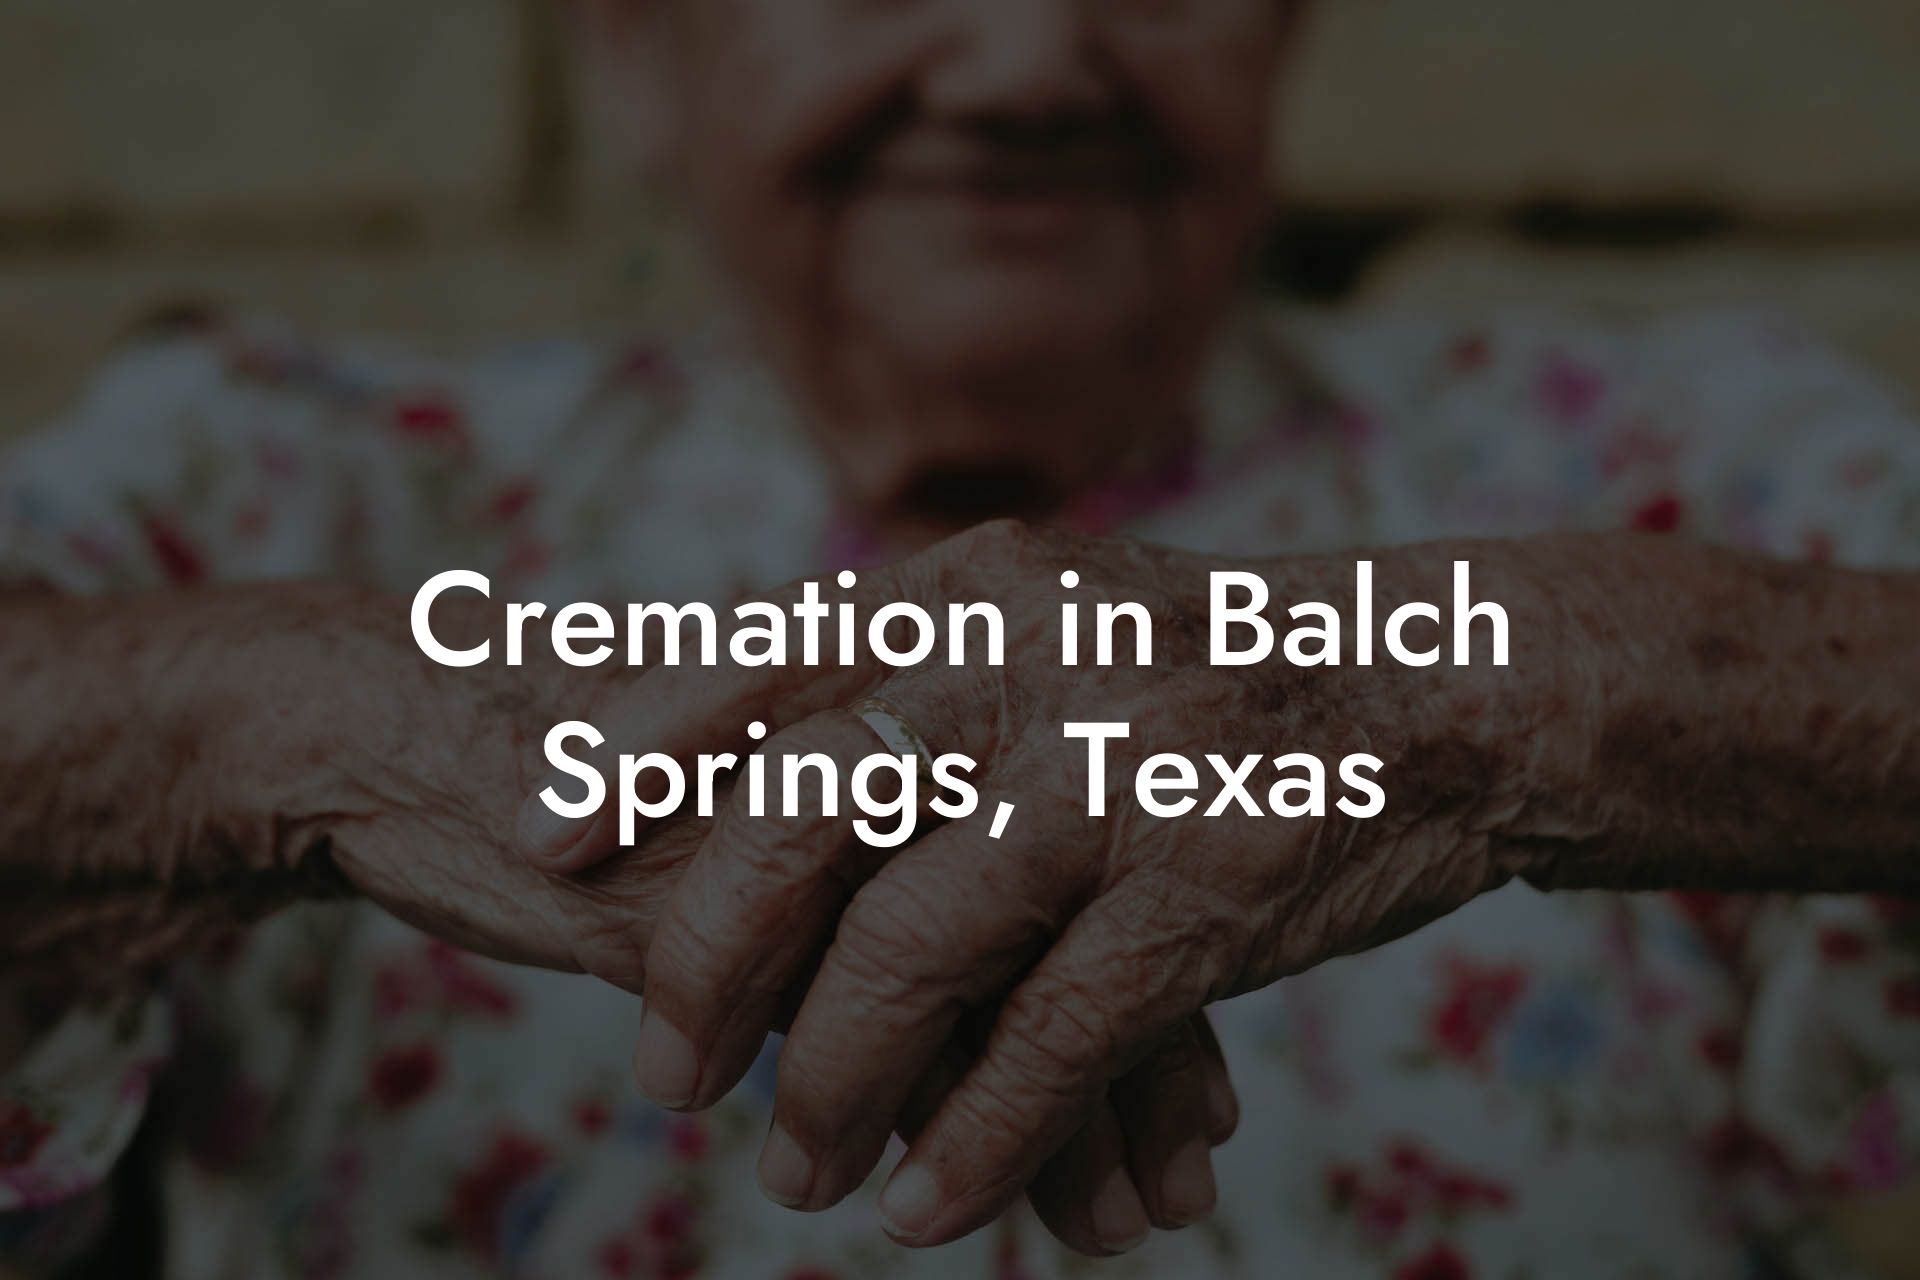 Cremation in Balch Springs, Texas